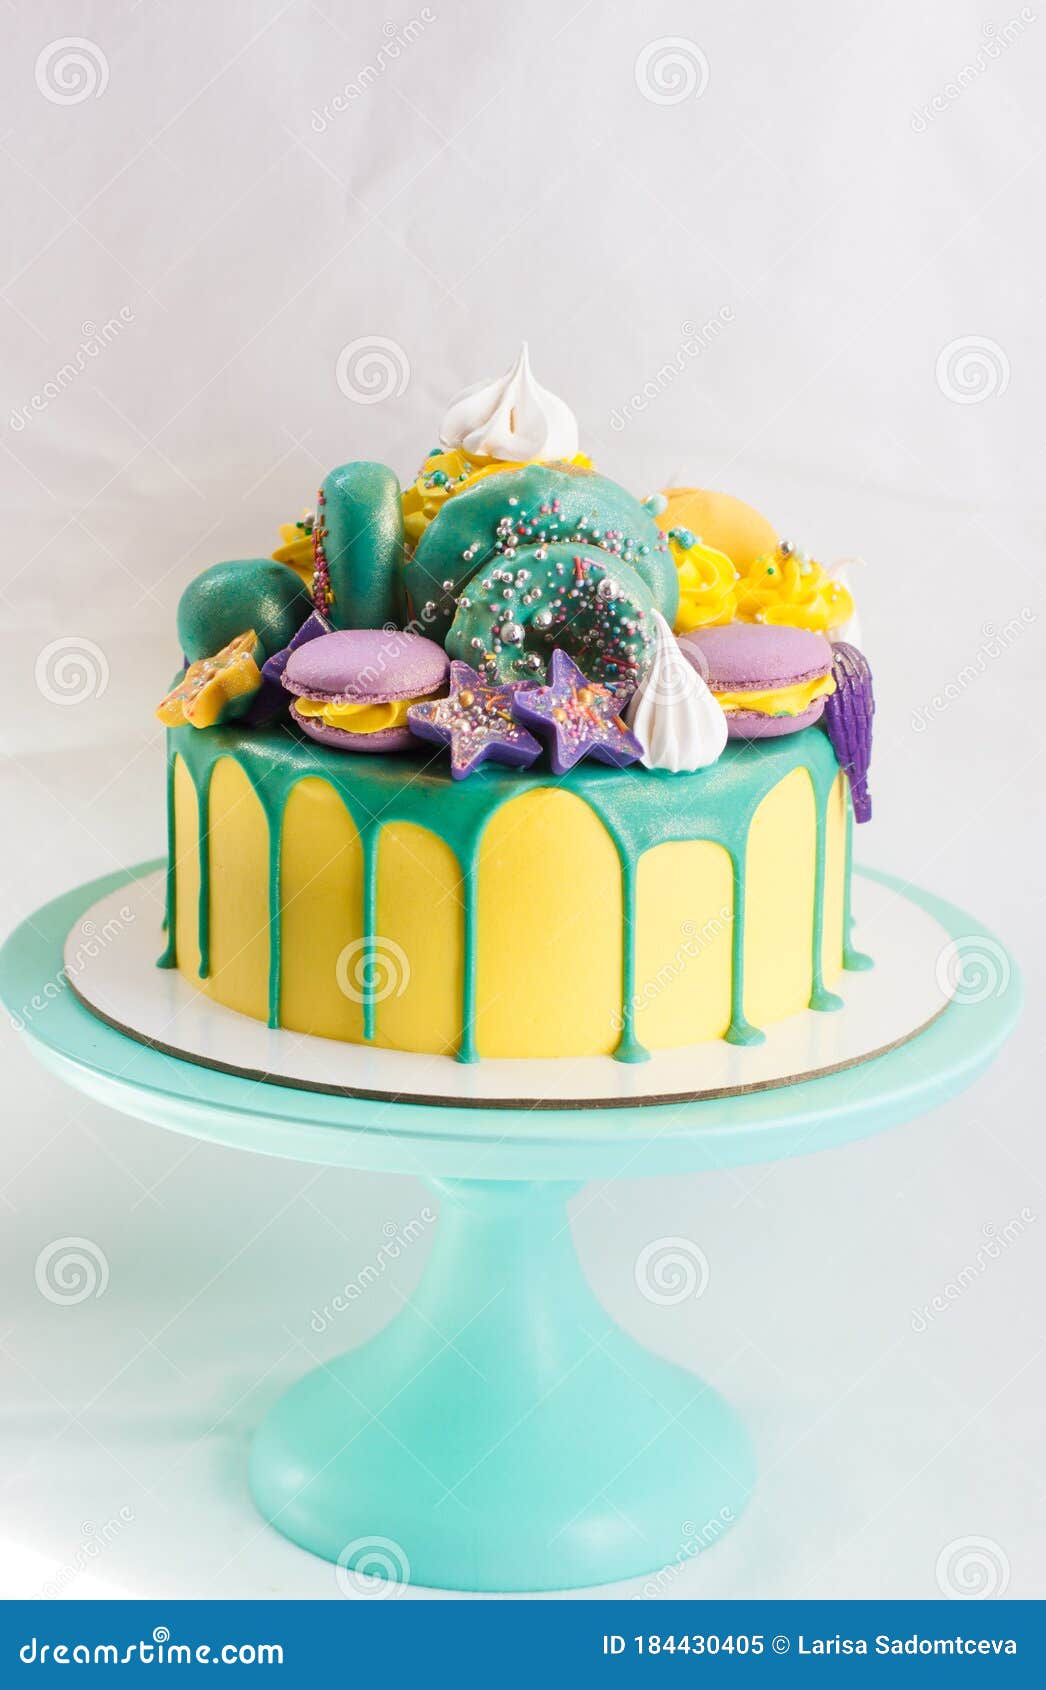 Bright Yellow Cake with Green Melted Chocolate, Cake Pops, Cupcake ...